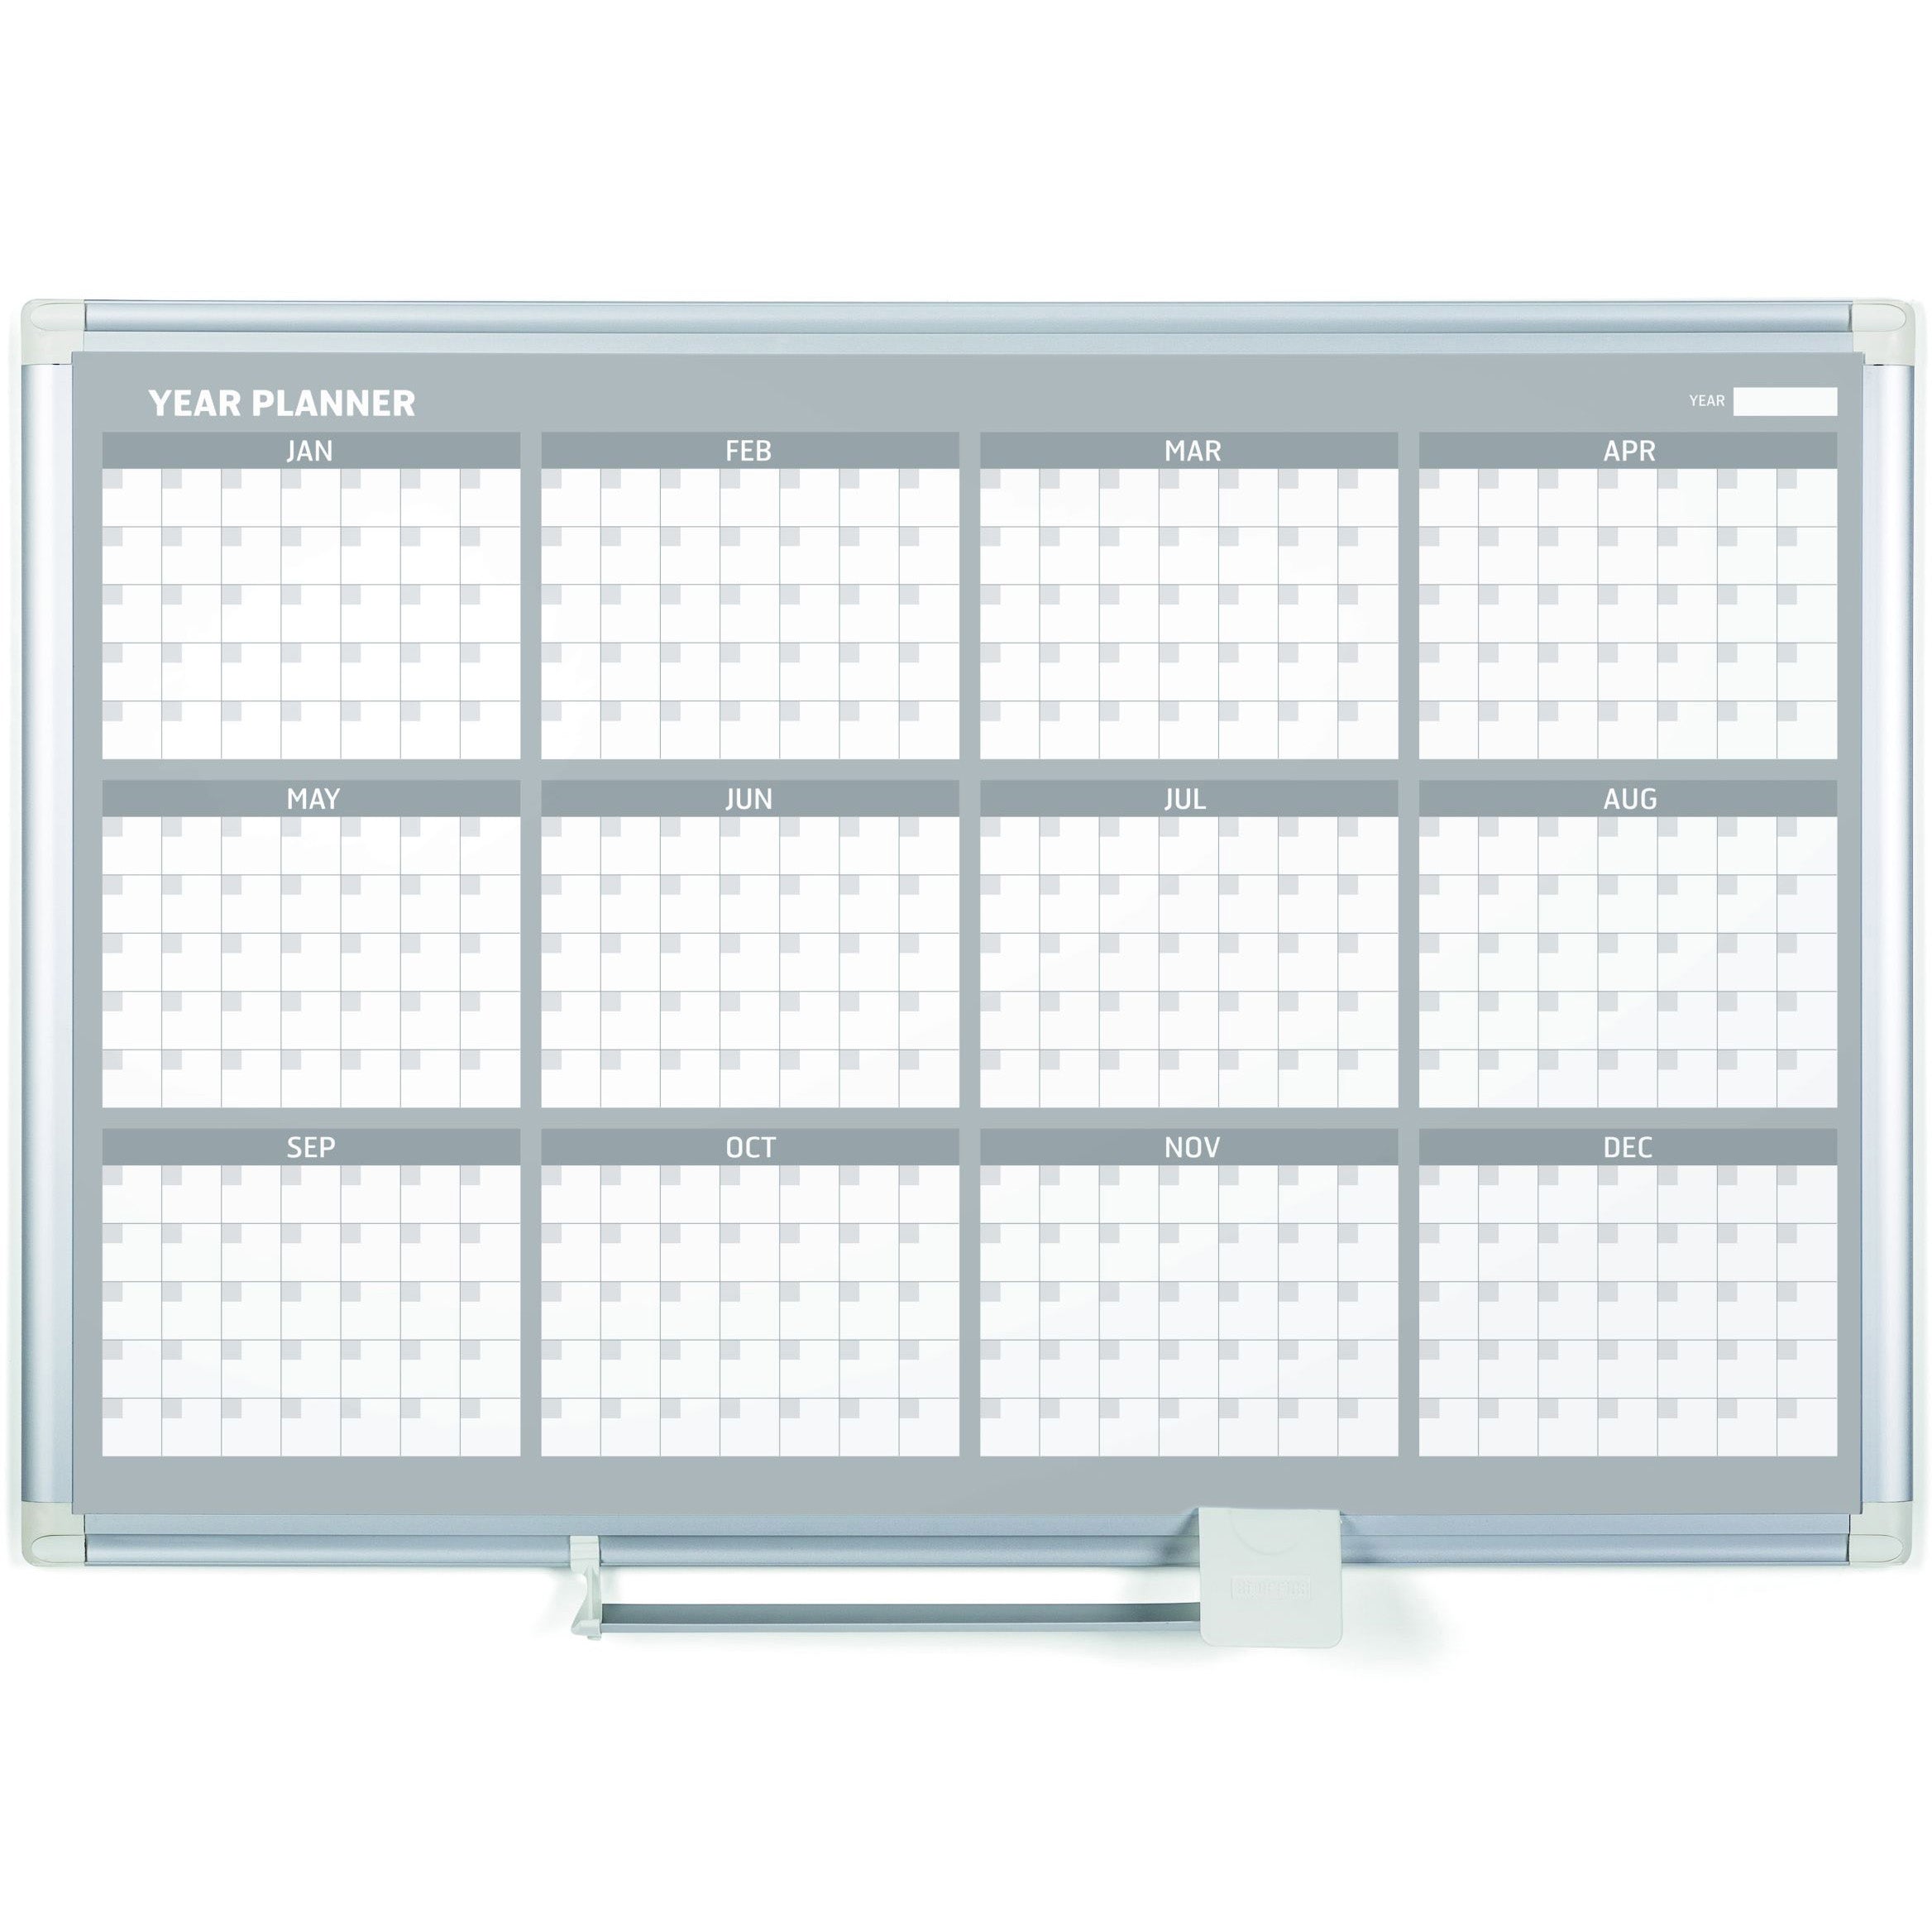 GA03106830 Magnetic Dry Erase 12 Month Yearly White Board Planner, Wall Mounting, Sliding Marker Tray, 24" x 36", Aluminum Frame by MasterVision